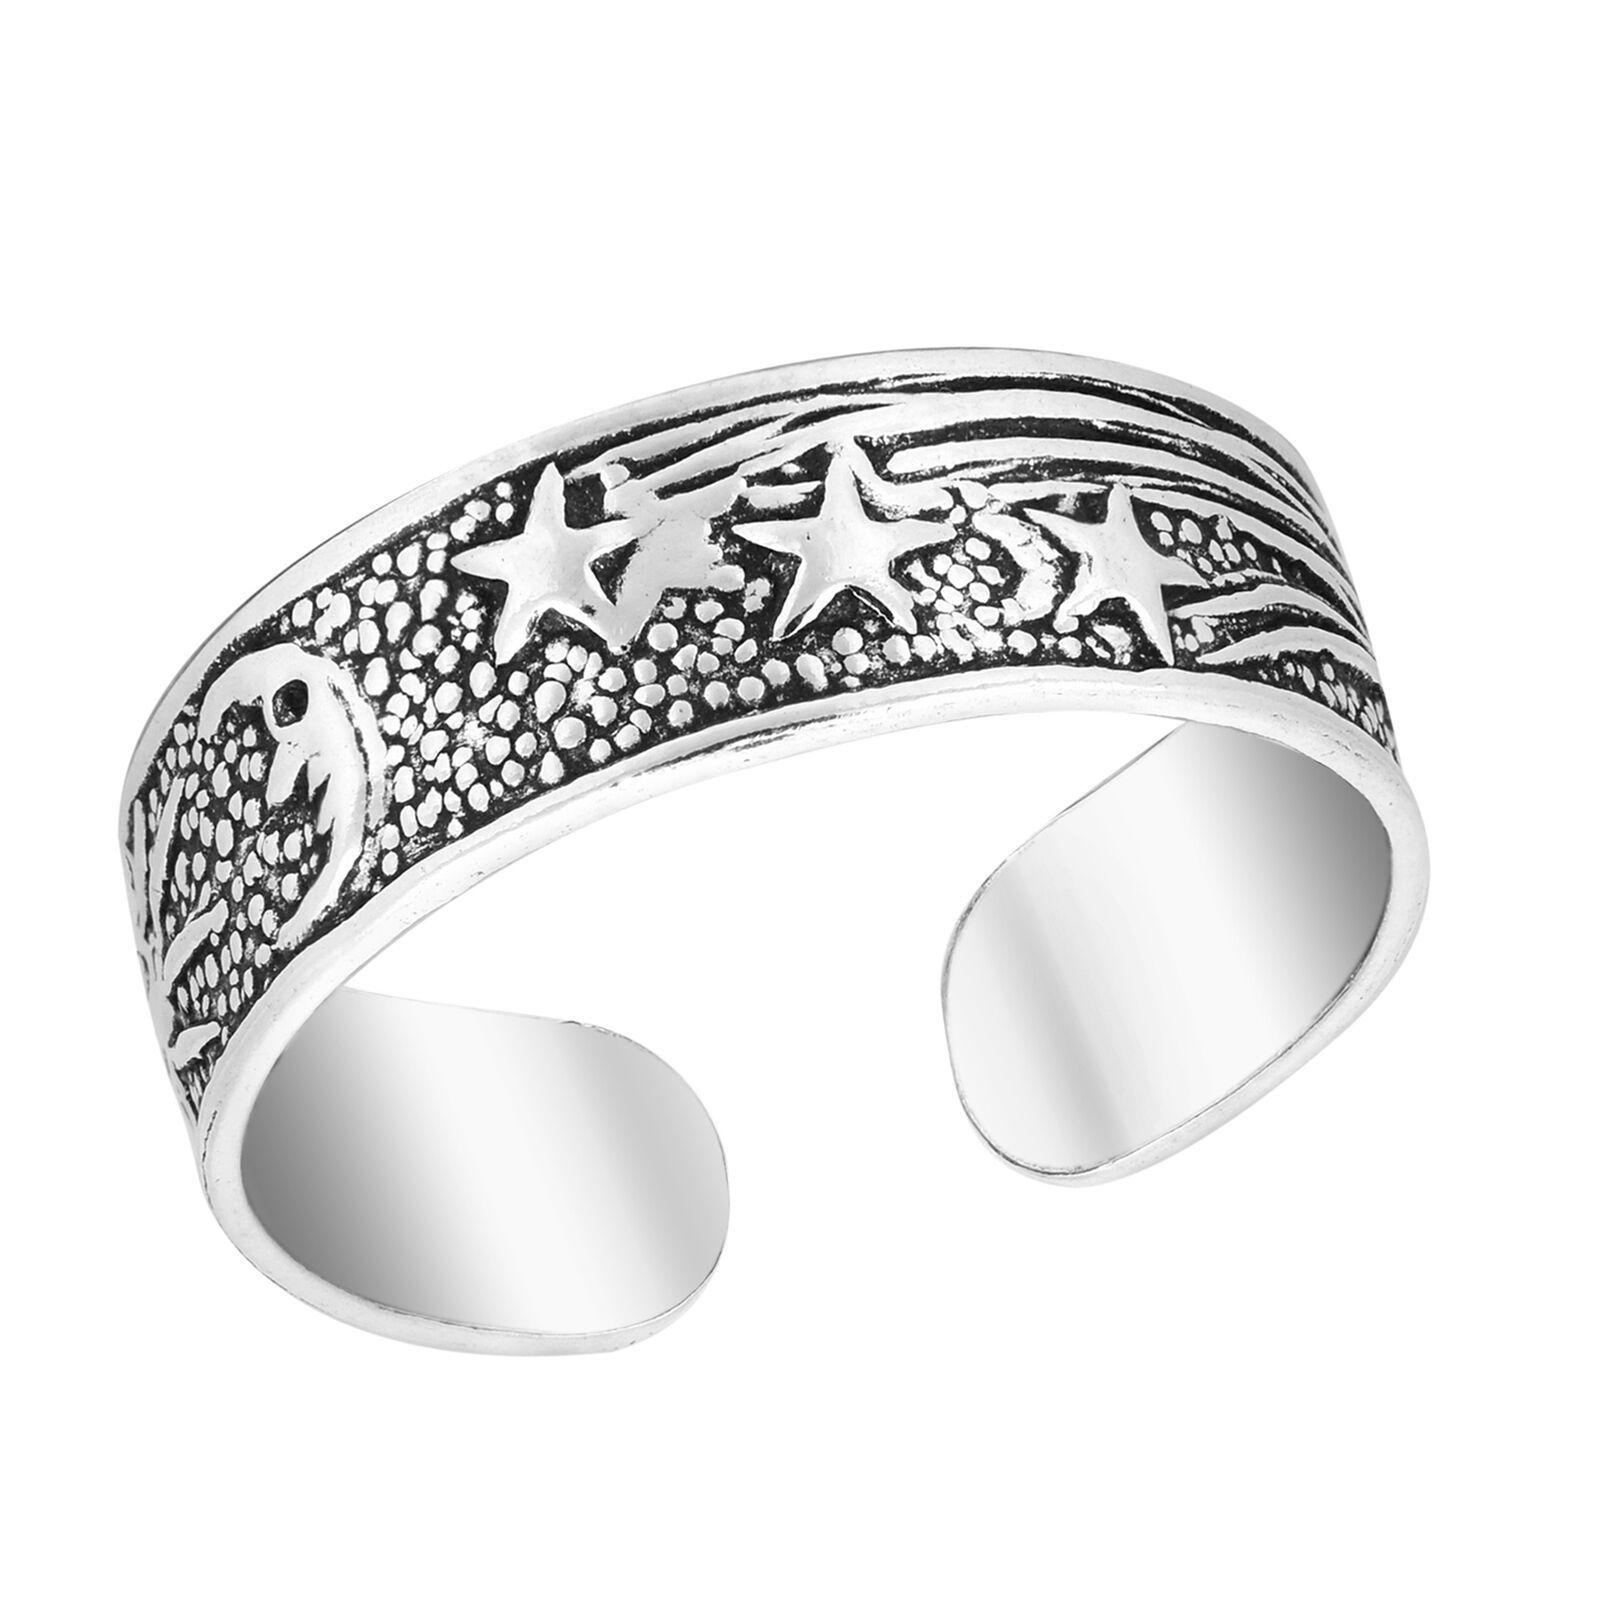 Stellar Sky Sun Moon and Shooting Stars Sterling Silver Toe Ring or Pinky Ring - $12.86